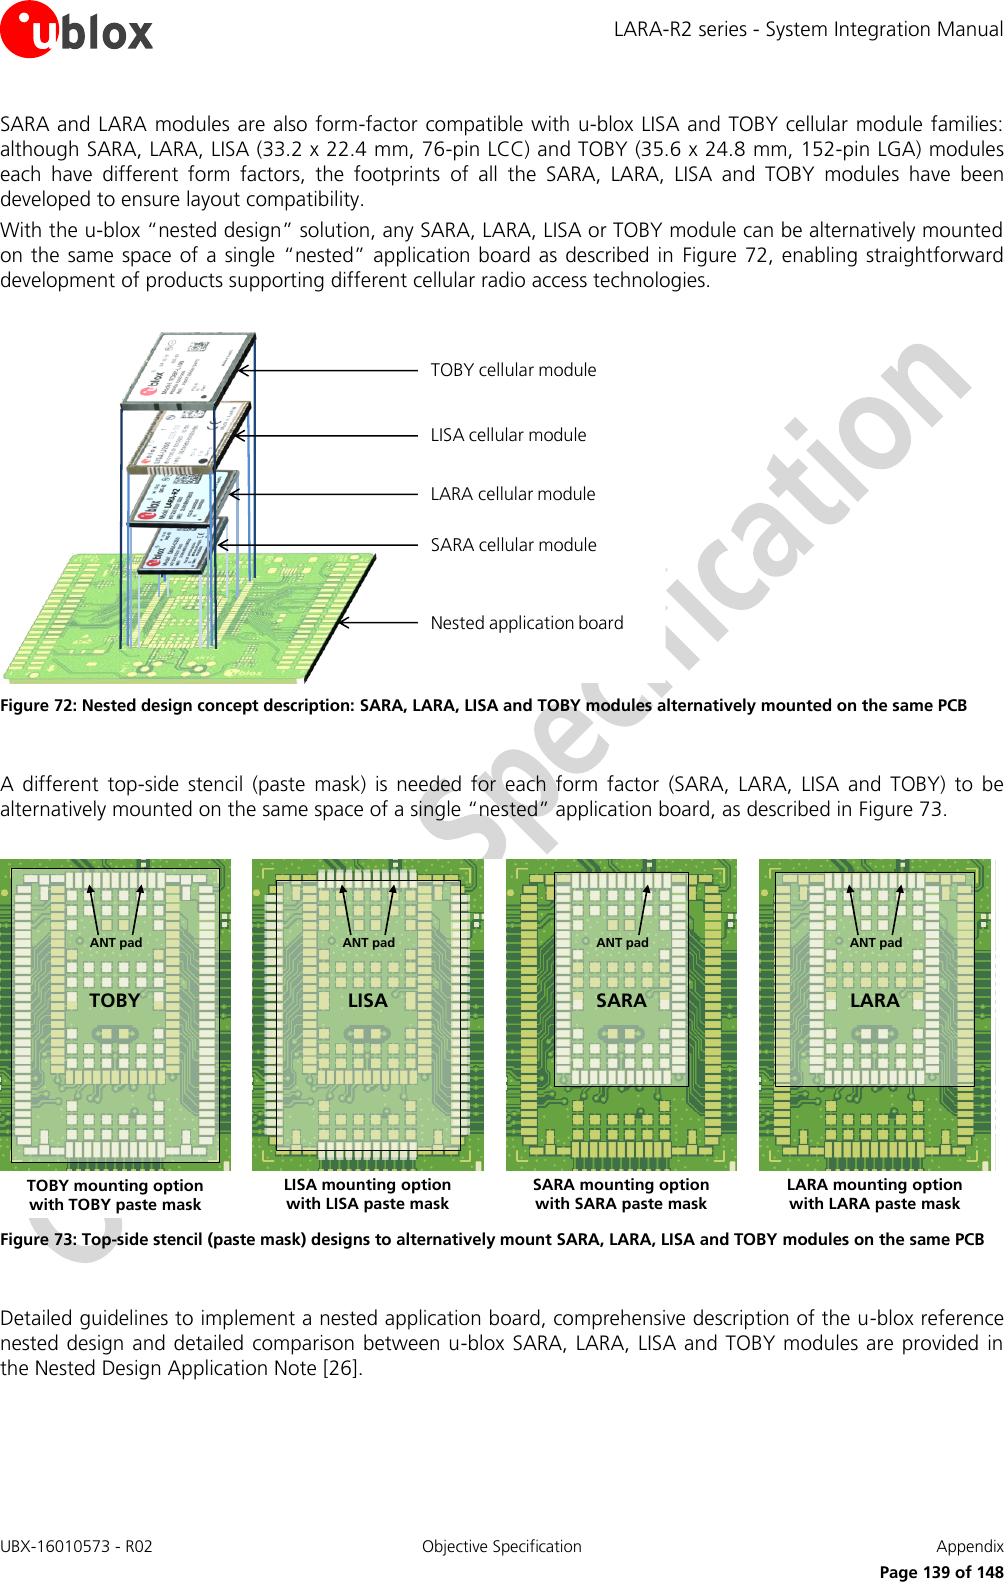 LARA-R2 series - System Integration Manual UBX-16010573 - R02  Objective Specification  Appendix      Page 139 of 148 SARA and LARA modules are also form-factor compatible with u-blox LISA and TOBY cellular module families: although SARA, LARA, LISA (33.2 x 22.4 mm, 76-pin LCC) and TOBY (35.6 x 24.8 mm, 152-pin LGA) modules each  have  different  form  factors,  the  footprints  of  all  the  SARA,  LARA,  LISA  and  TOBY  modules  have  been developed to ensure layout compatibility. With the u-blox “nested design” solution, any SARA, LARA, LISA or TOBY module can be alternatively mounted on the same space  of  a single “nested” application board as described in  Figure 72, enabling straightforward development of products supporting different cellular radio access technologies.  LISA cellular moduleLARA cellular moduleSARA cellular moduleNested application boardTOBY cellular module Figure 72: Nested design concept description: SARA, LARA, LISA and TOBY modules alternatively mounted on the same PCB  A  different  top-side  stencil  (paste  mask)  is  needed  for  each  form  factor  (SARA,  LARA,  LISA  and  TOBY)  to  be alternatively mounted on the same space of a single “nested” application board, as described in Figure 73.  LISA mounting optionwith LISA paste maskANT padTOBY mounting optionwith TOBY paste maskANT padSARA mounting optionwith SARA paste maskANT pad ANT padLARA mounting optionwith LARA paste maskLISATOBY SARA LARA Figure 73: Top-side stencil (paste mask) designs to alternatively mount SARA, LARA, LISA and TOBY modules on the same PCB  Detailed guidelines to implement a nested application board, comprehensive description of the u-blox reference nested design and detailed comparison between u-blox SARA, LARA, LISA and TOBY modules are provided in the Nested Design Application Note [26].   